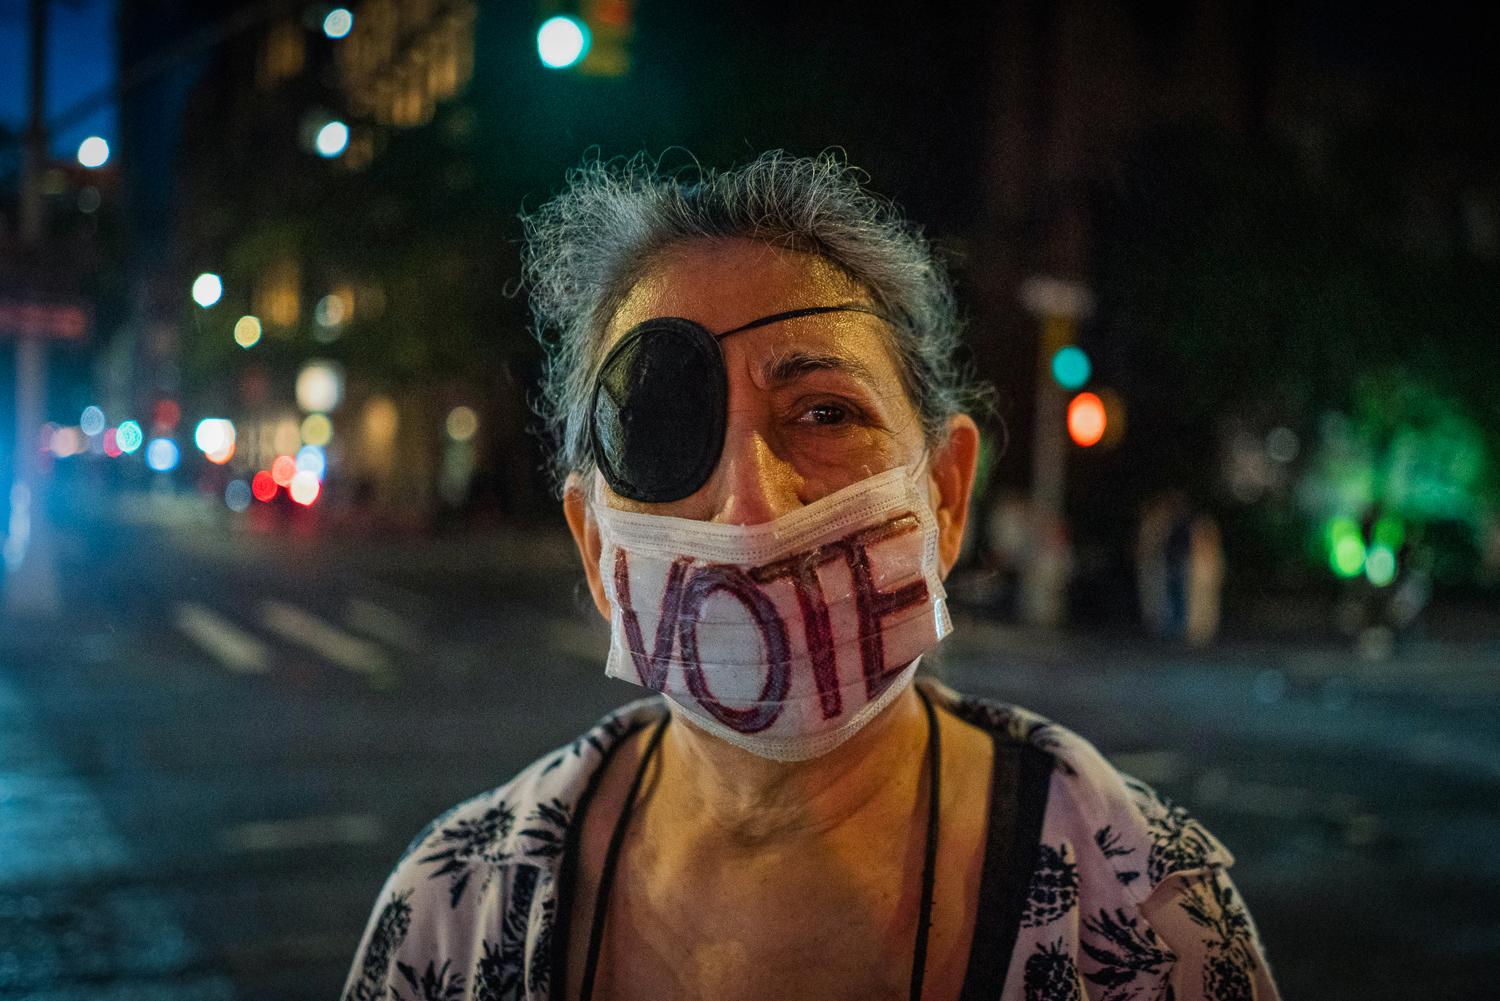 Roe v. Wade Protests - A demonstrator wears a “vote” face-mask...